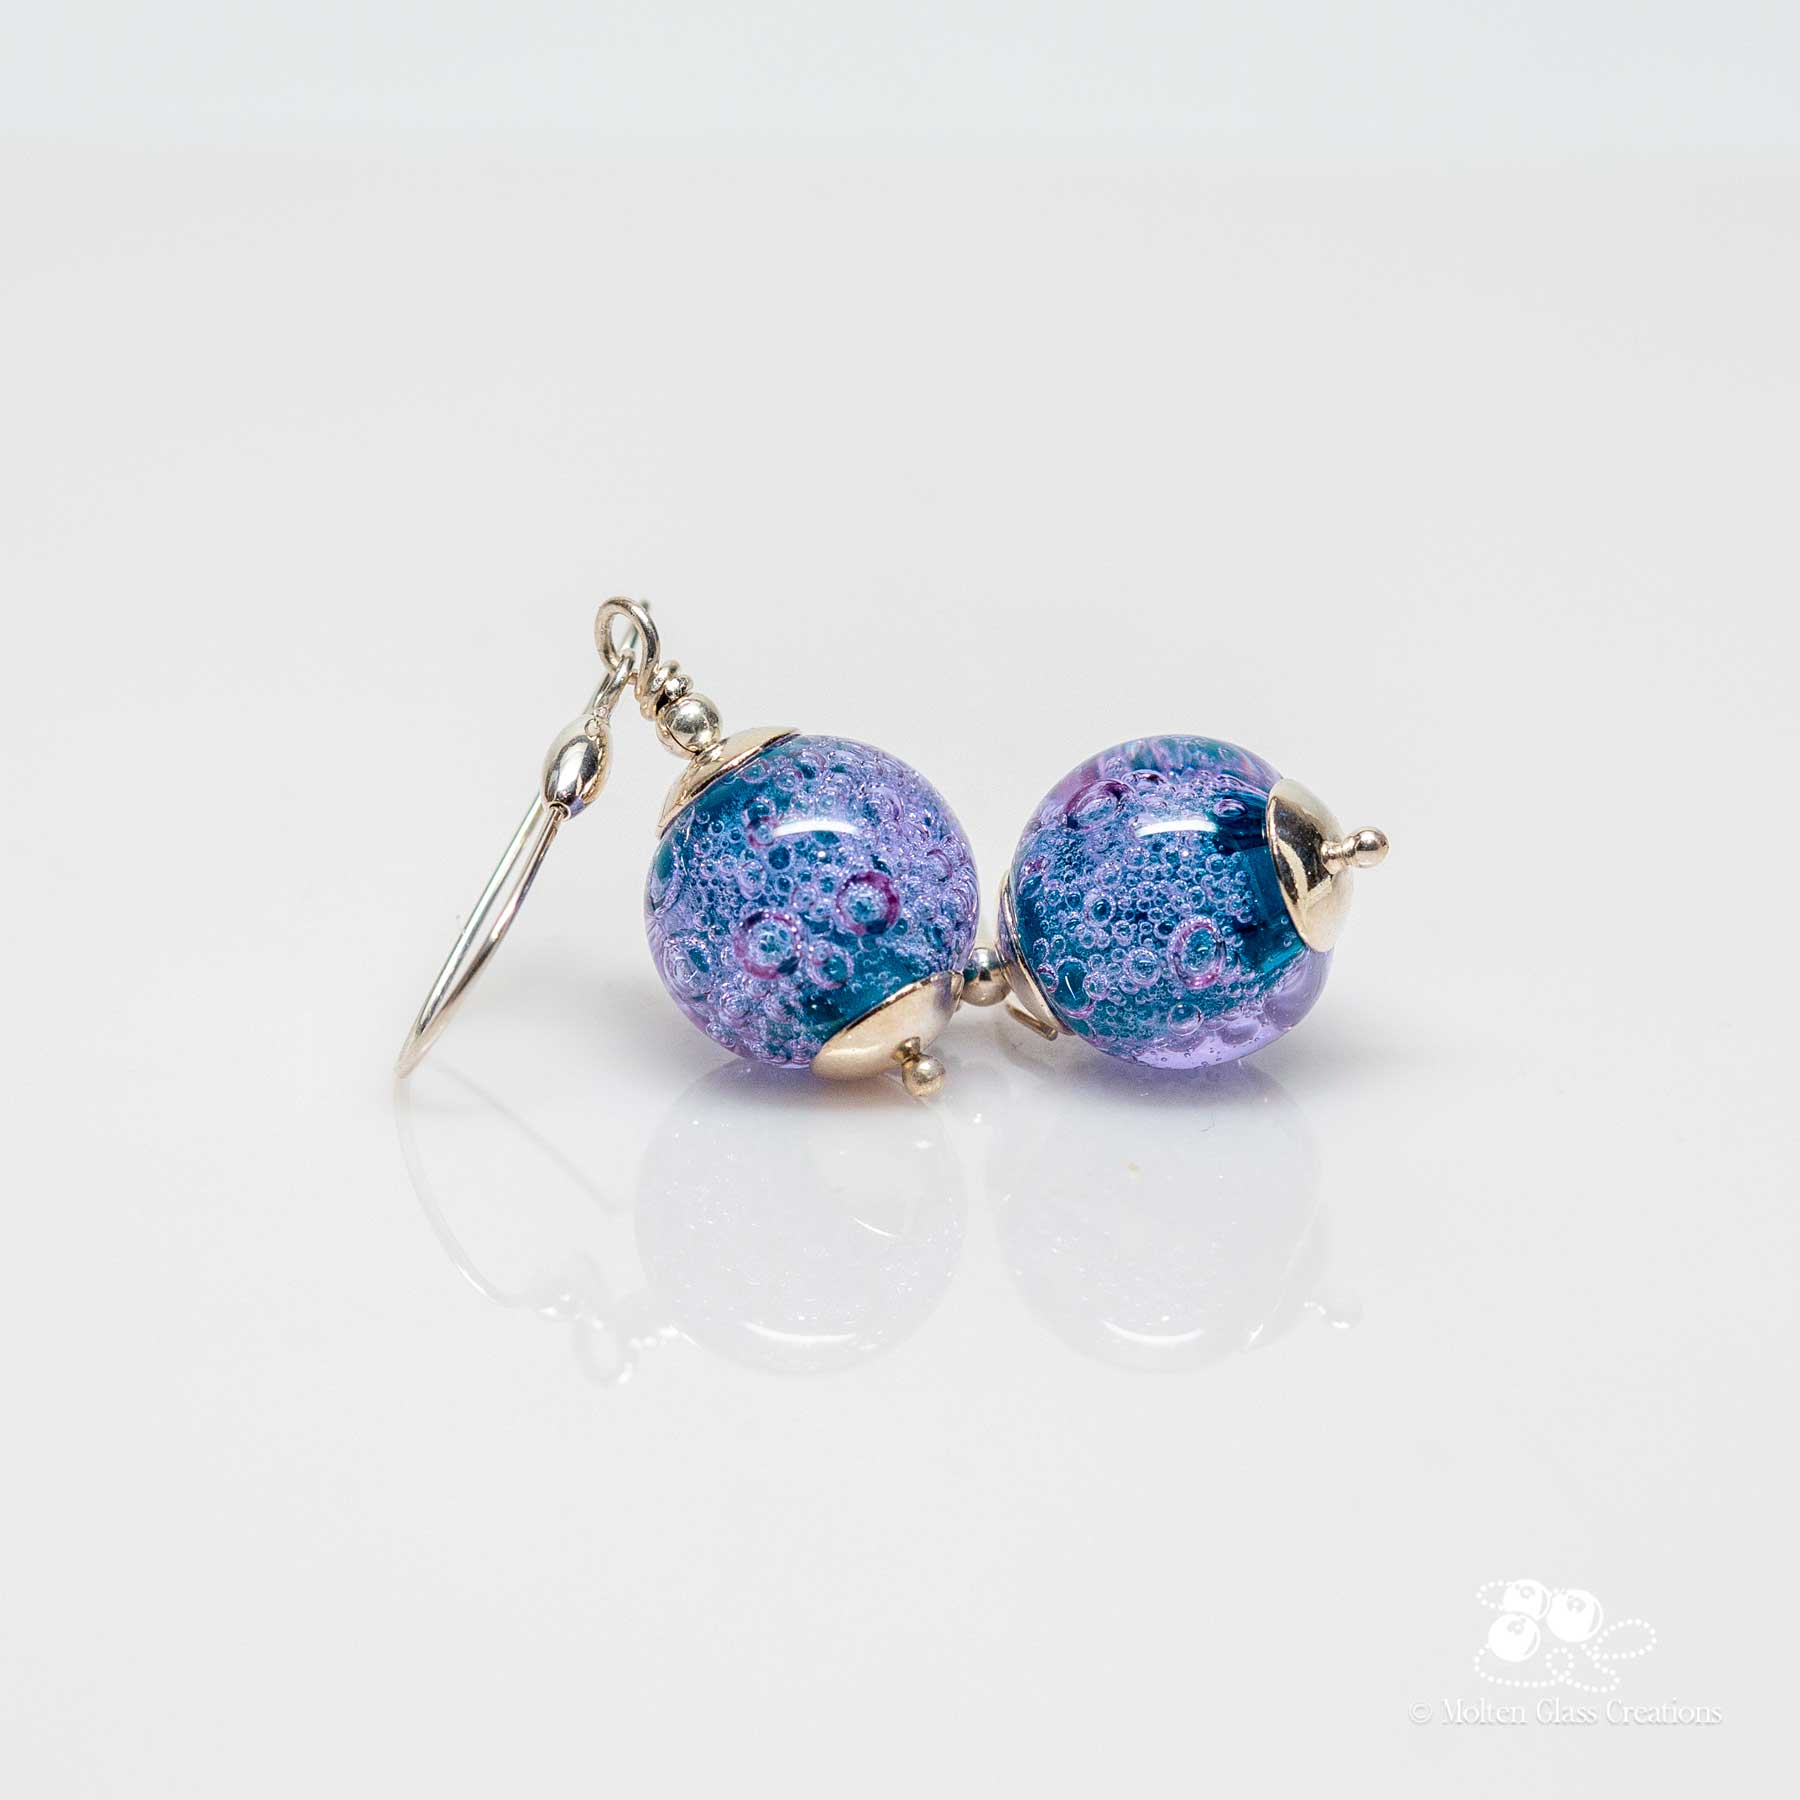 teal and lavender glass bead earrings